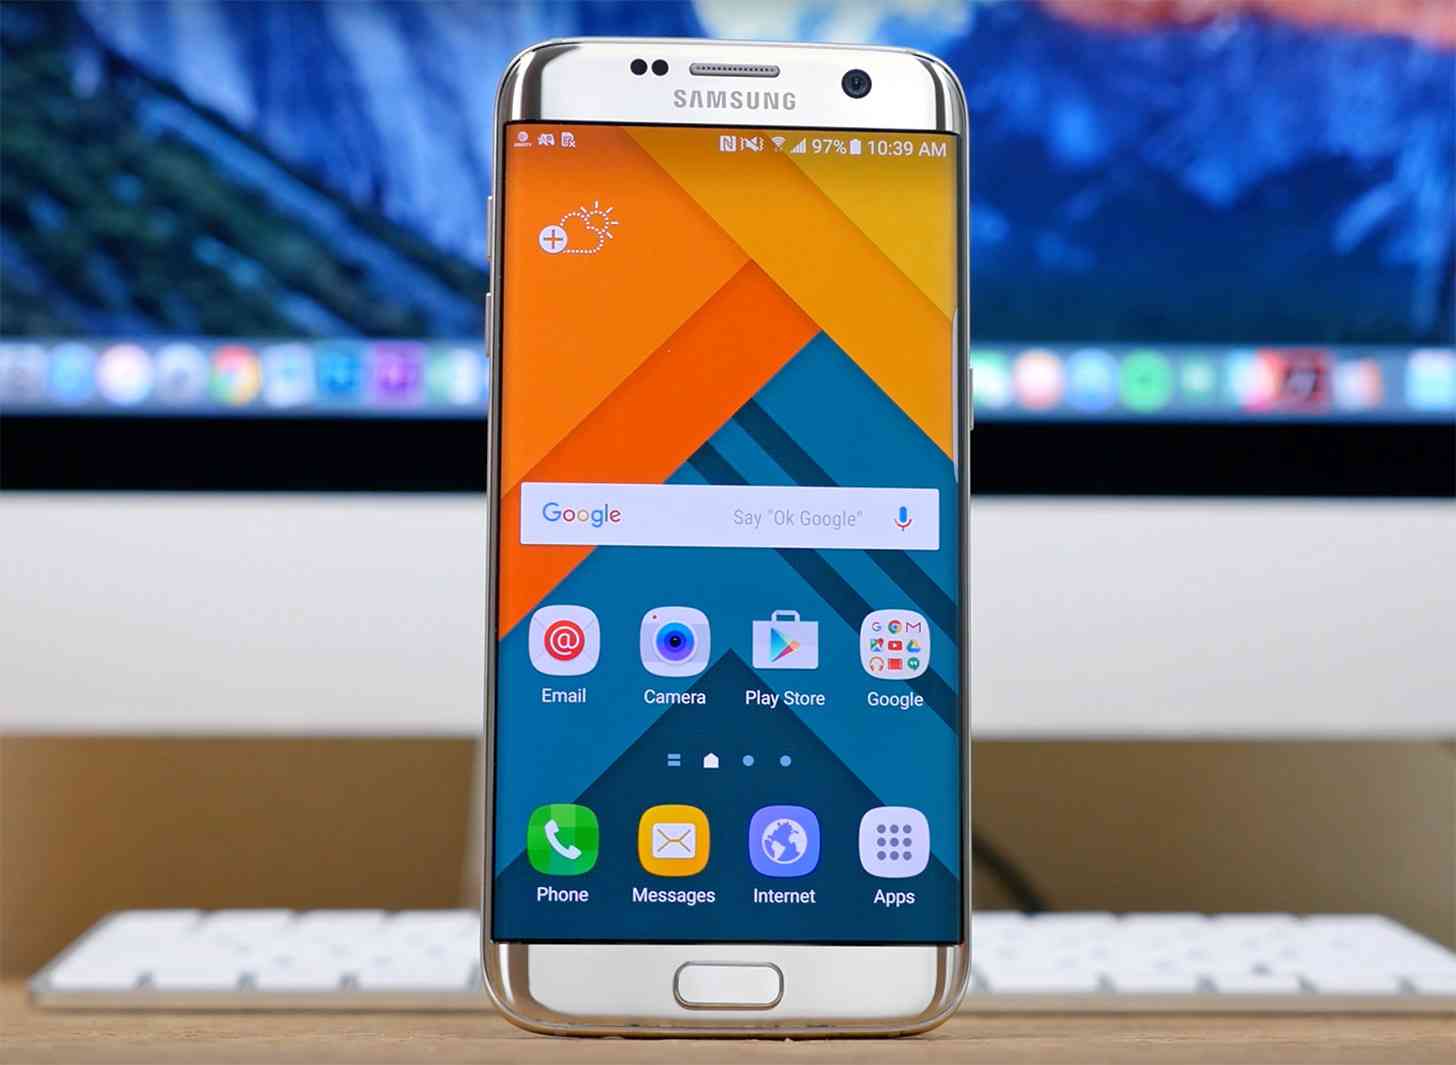 Samsung Galaxy S7 edge hands-on video review